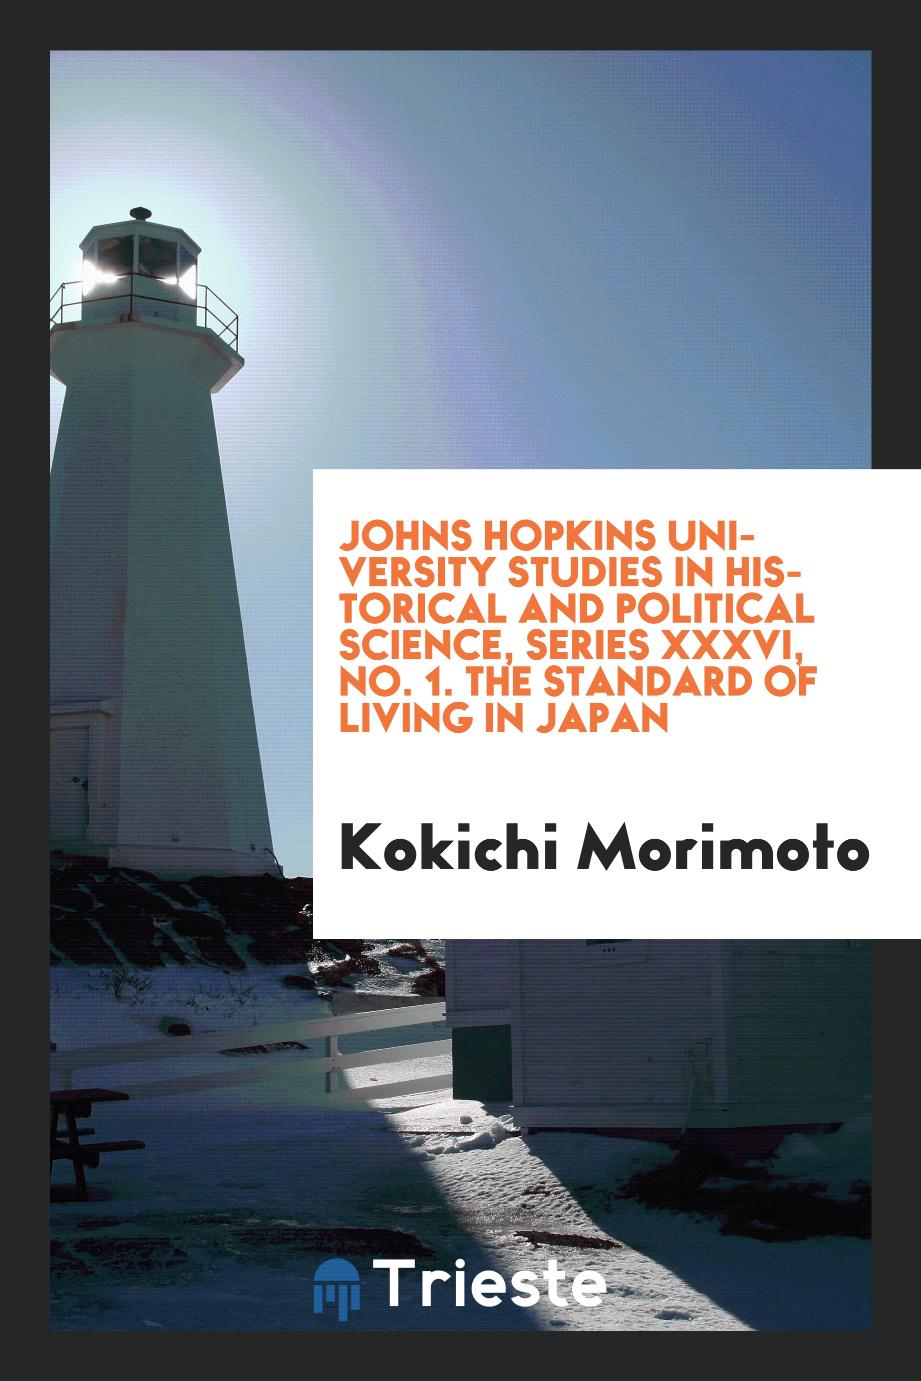 Johns Hopkins University Studies in Historical and Political Science, Series XXXVI, No. 1. The standard of living in Japan